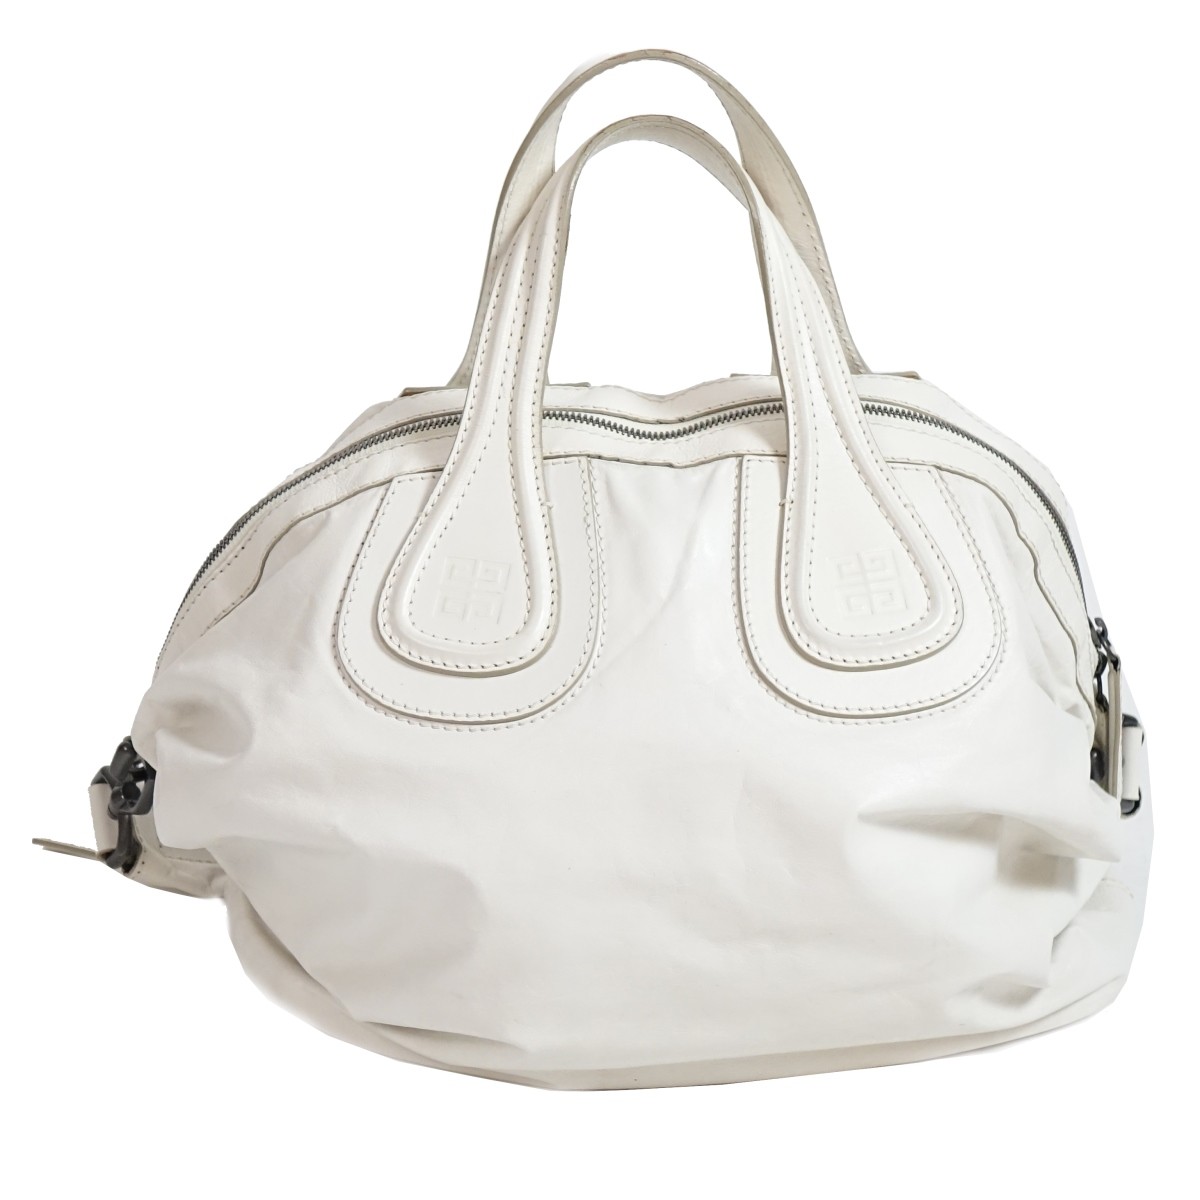 Givenchy White Leather Tote Bag